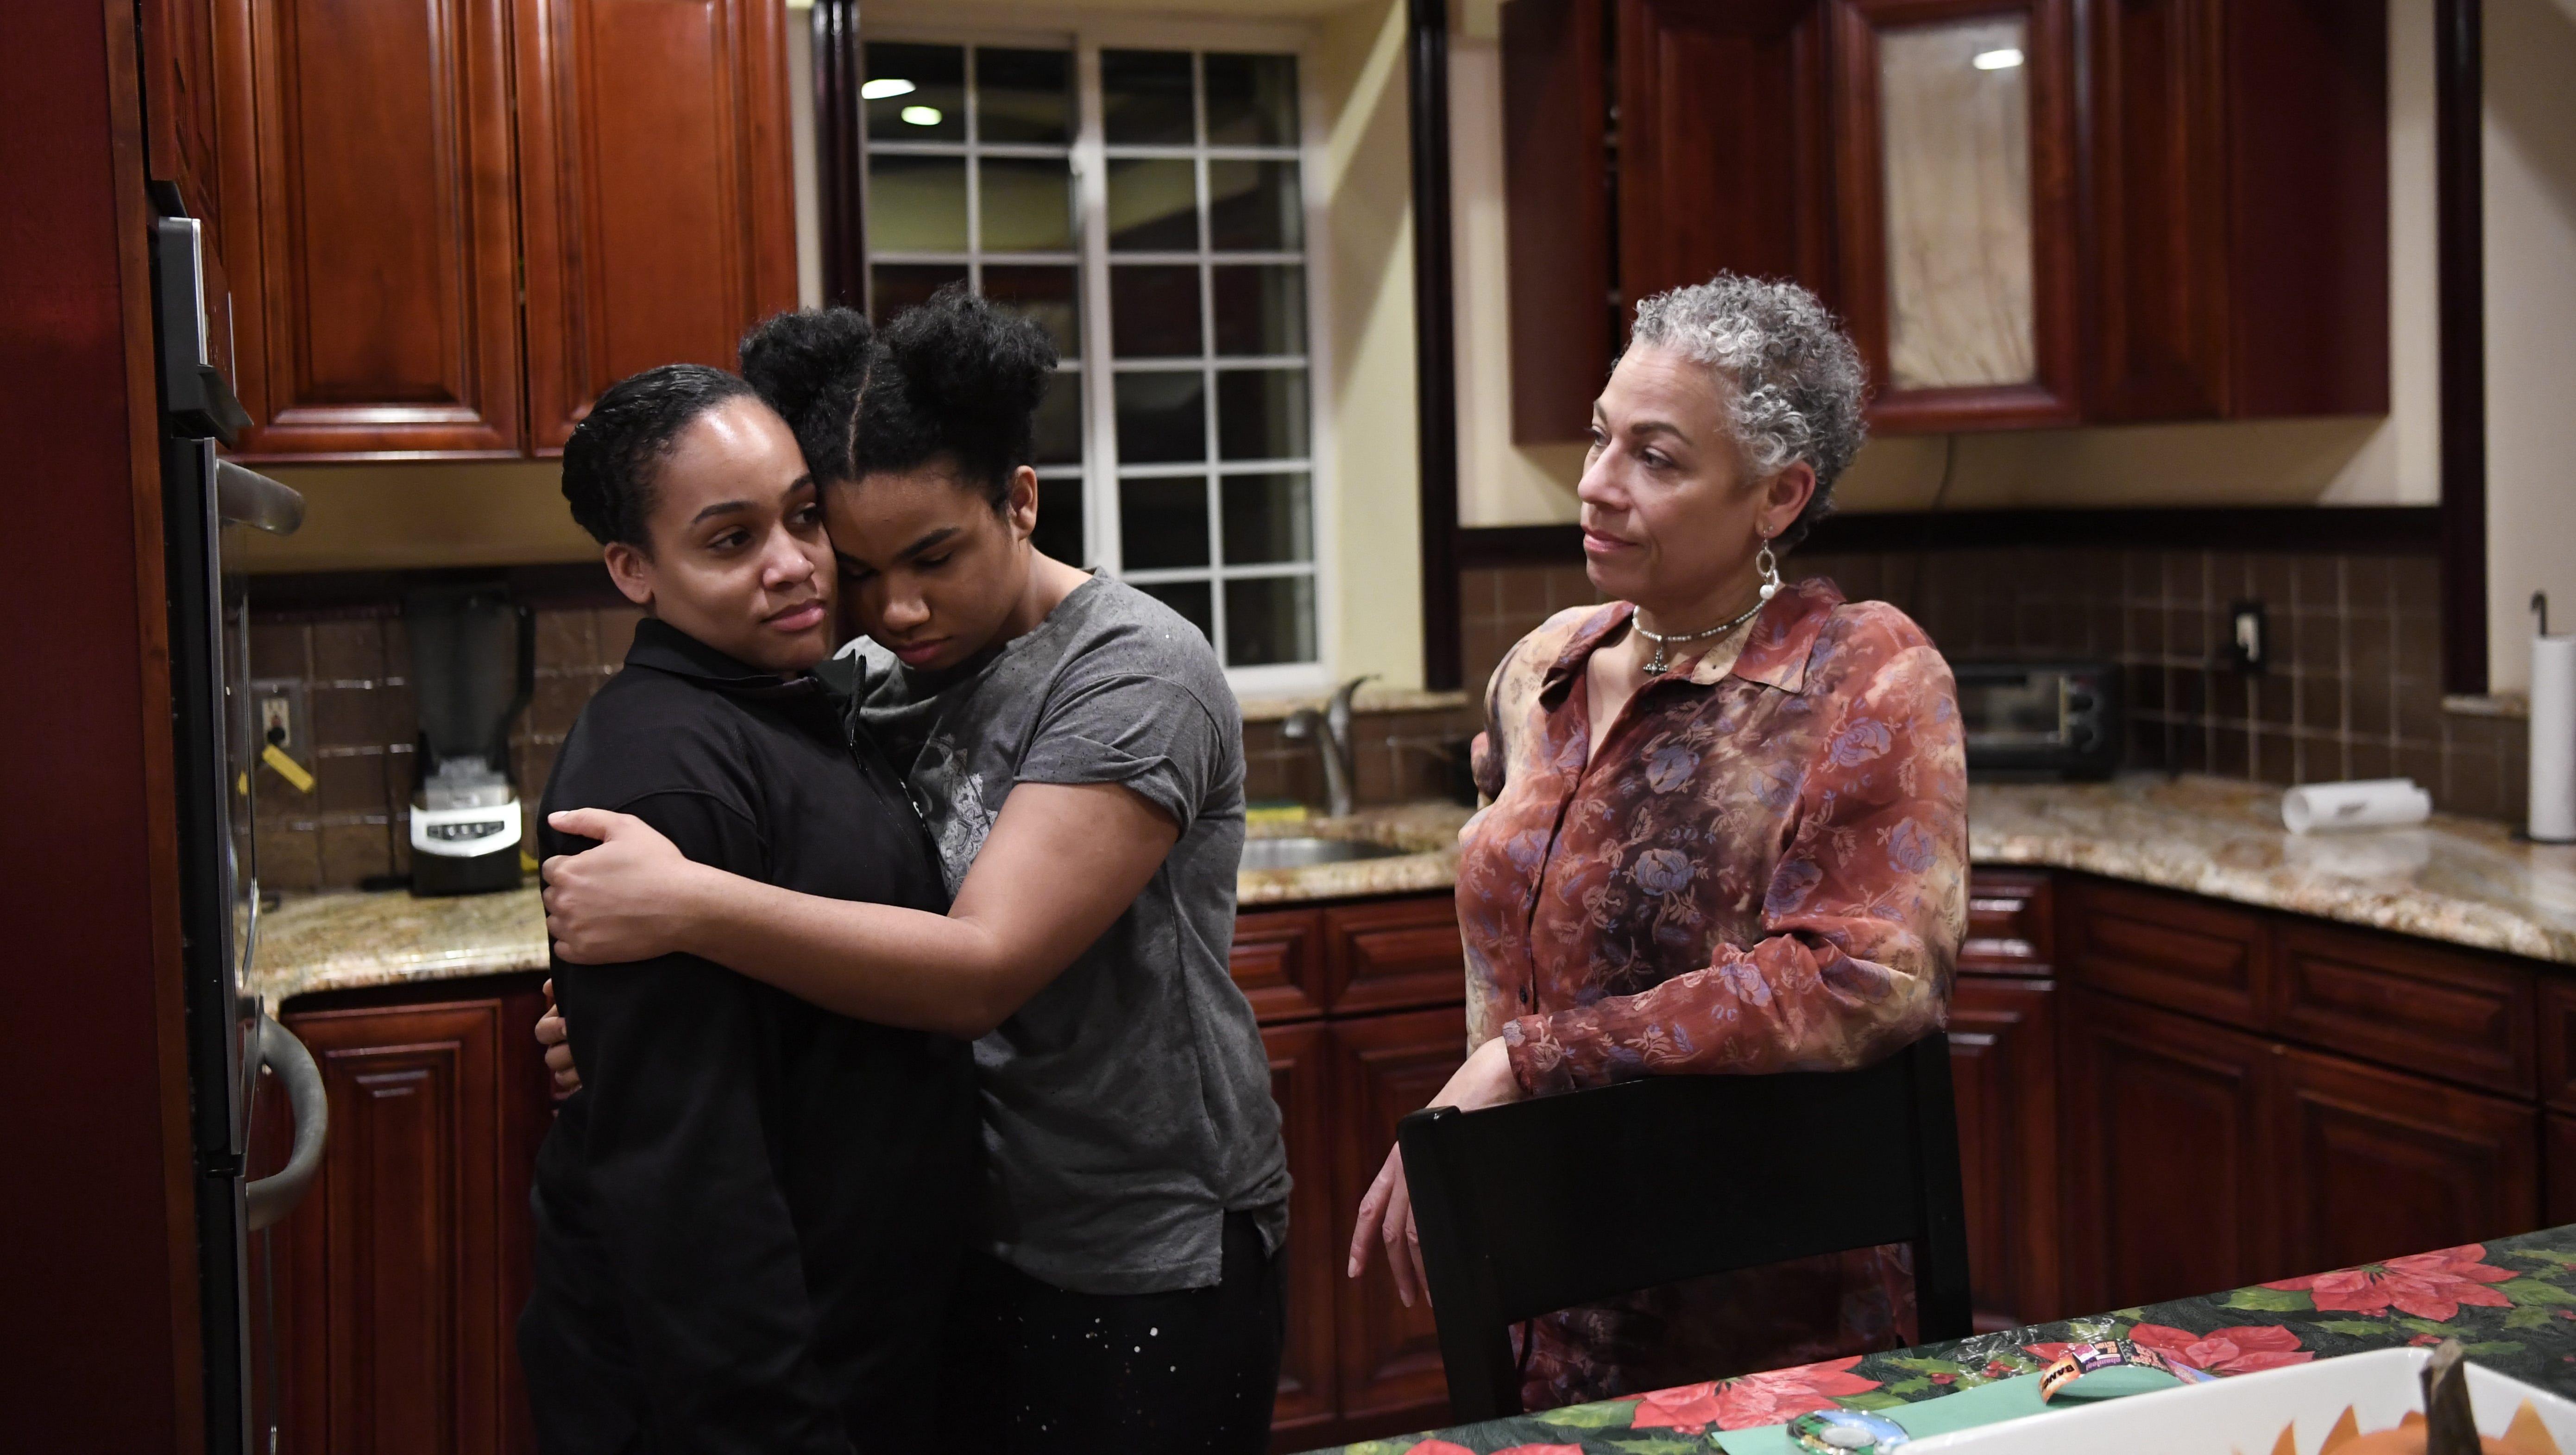 Wé McDonald, center, is at home with her sister, Jasmine, and mother, Jaqueline.